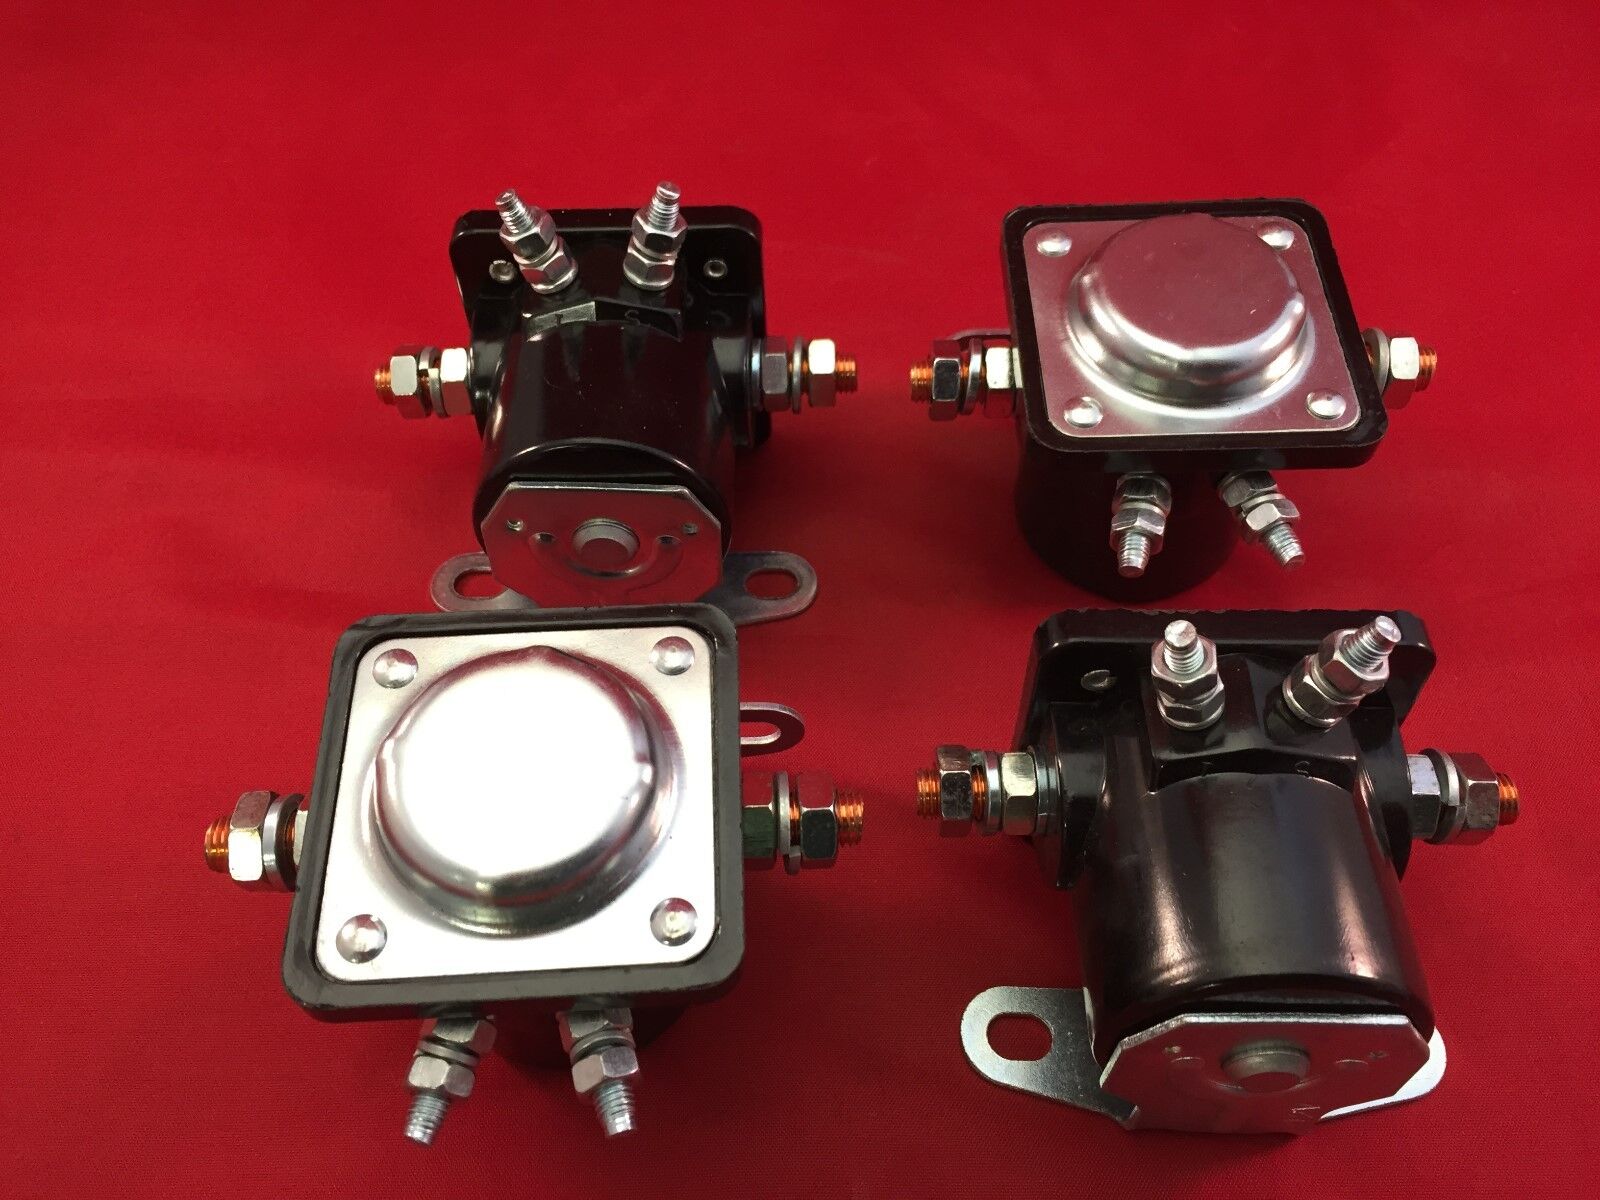 FOUR (4) NEW WINCH SOLENOIDS Solenoid Relay for EARLY WARN MODELS XD9000i 9.5ti 